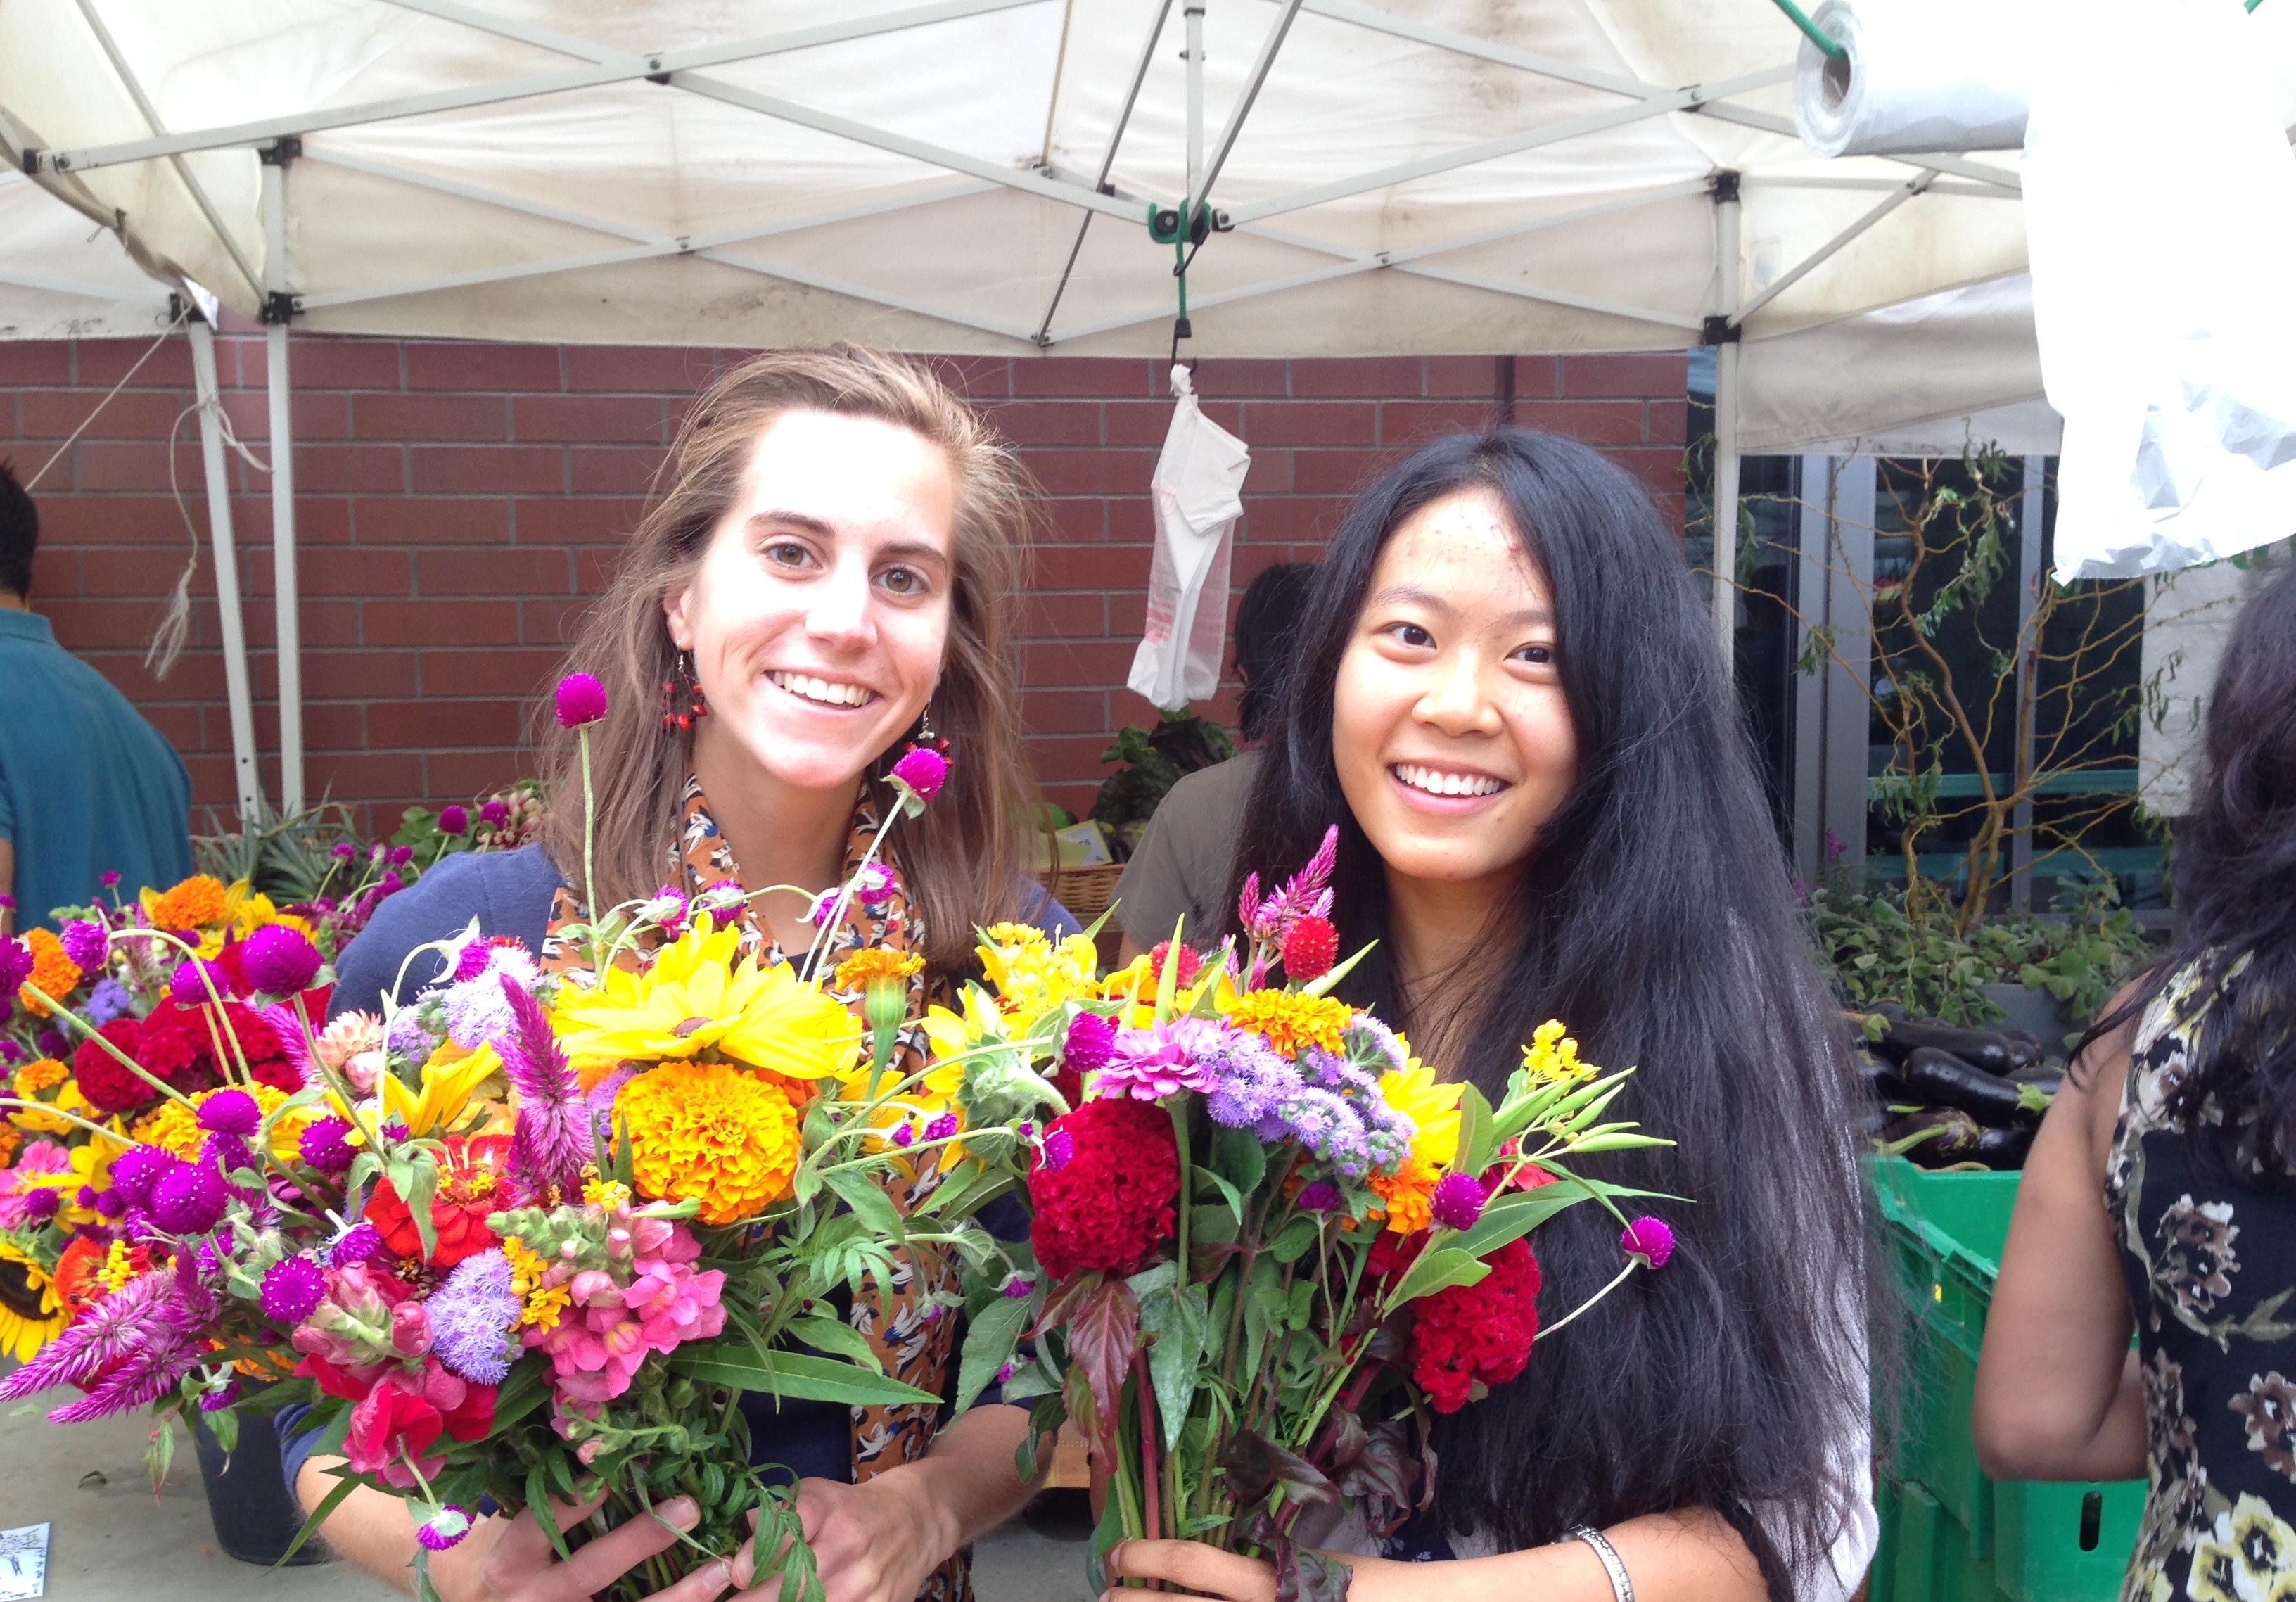 This is a photo of my friend and me with flowers from the farmer's market.